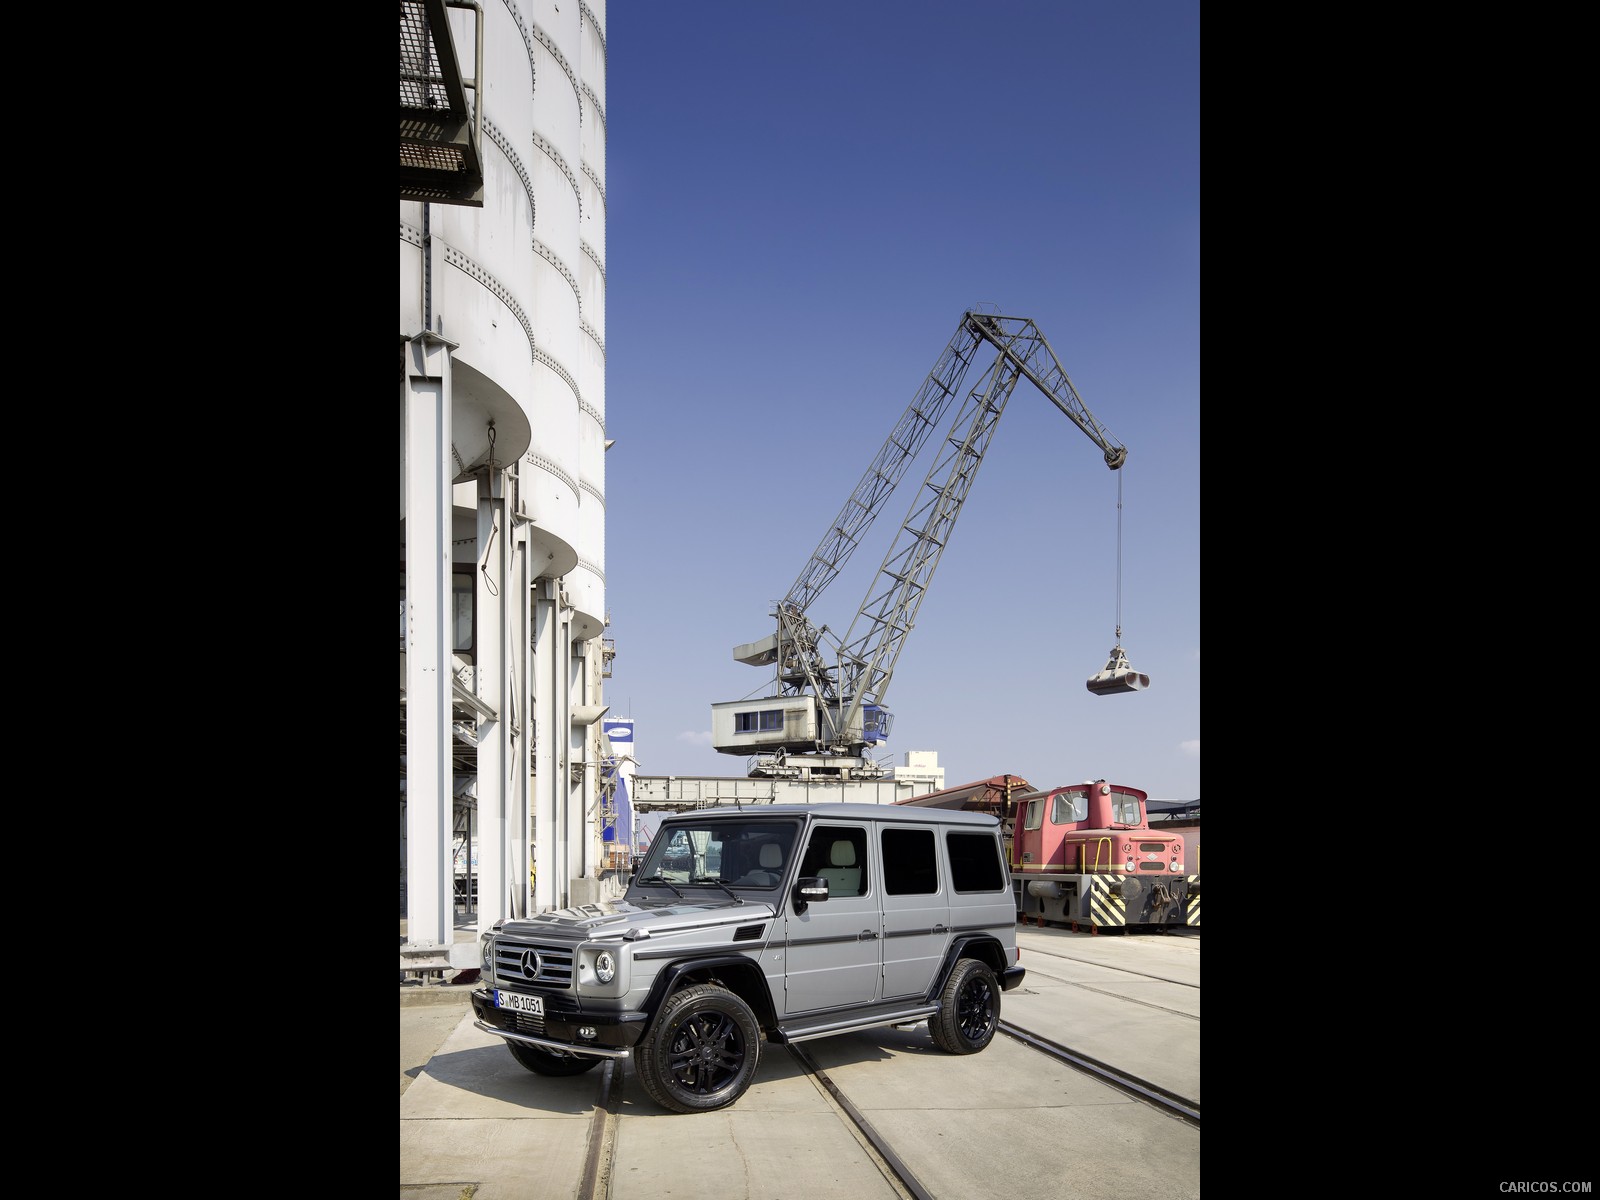 Mercedes-Benz G-Class "Edition Select" (2012)  - Side, #6 of 13